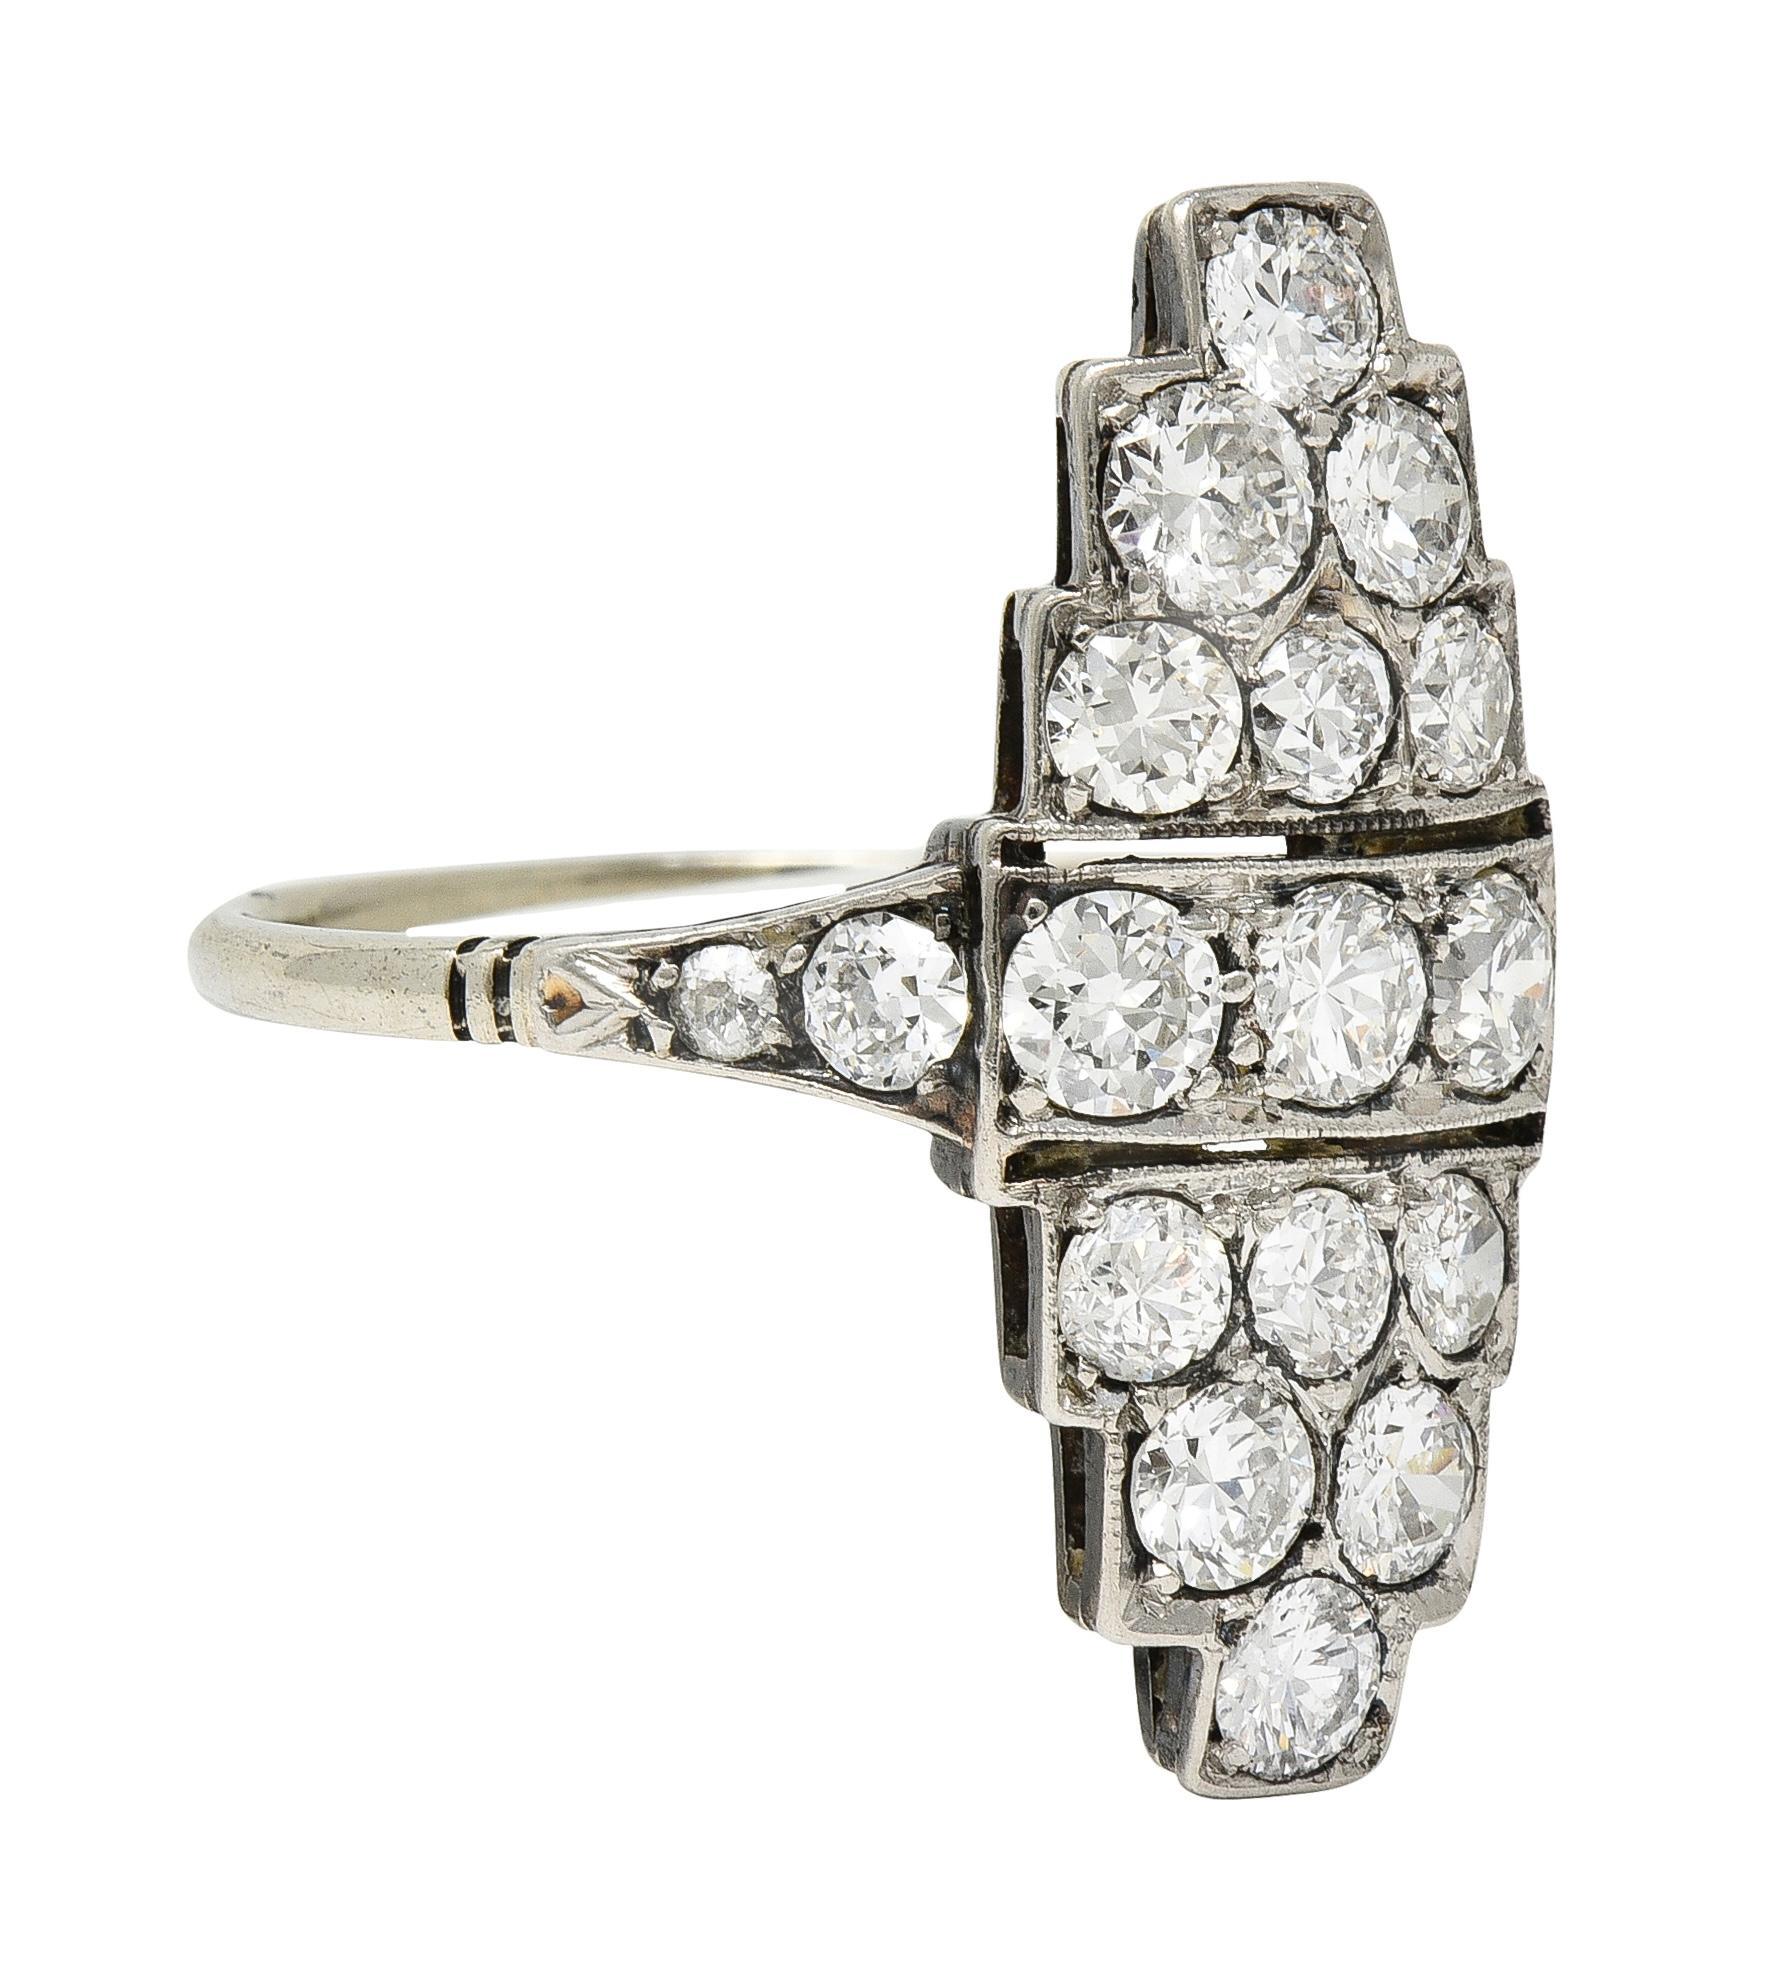 Designed as a navette-shaped form with pierced detail and stepped edges
With milgrain detail and flanked by flaring shoulders with grooved accents
Bead set throughout with old European and transitional cut diamonds 
Weighing approximately 1.60